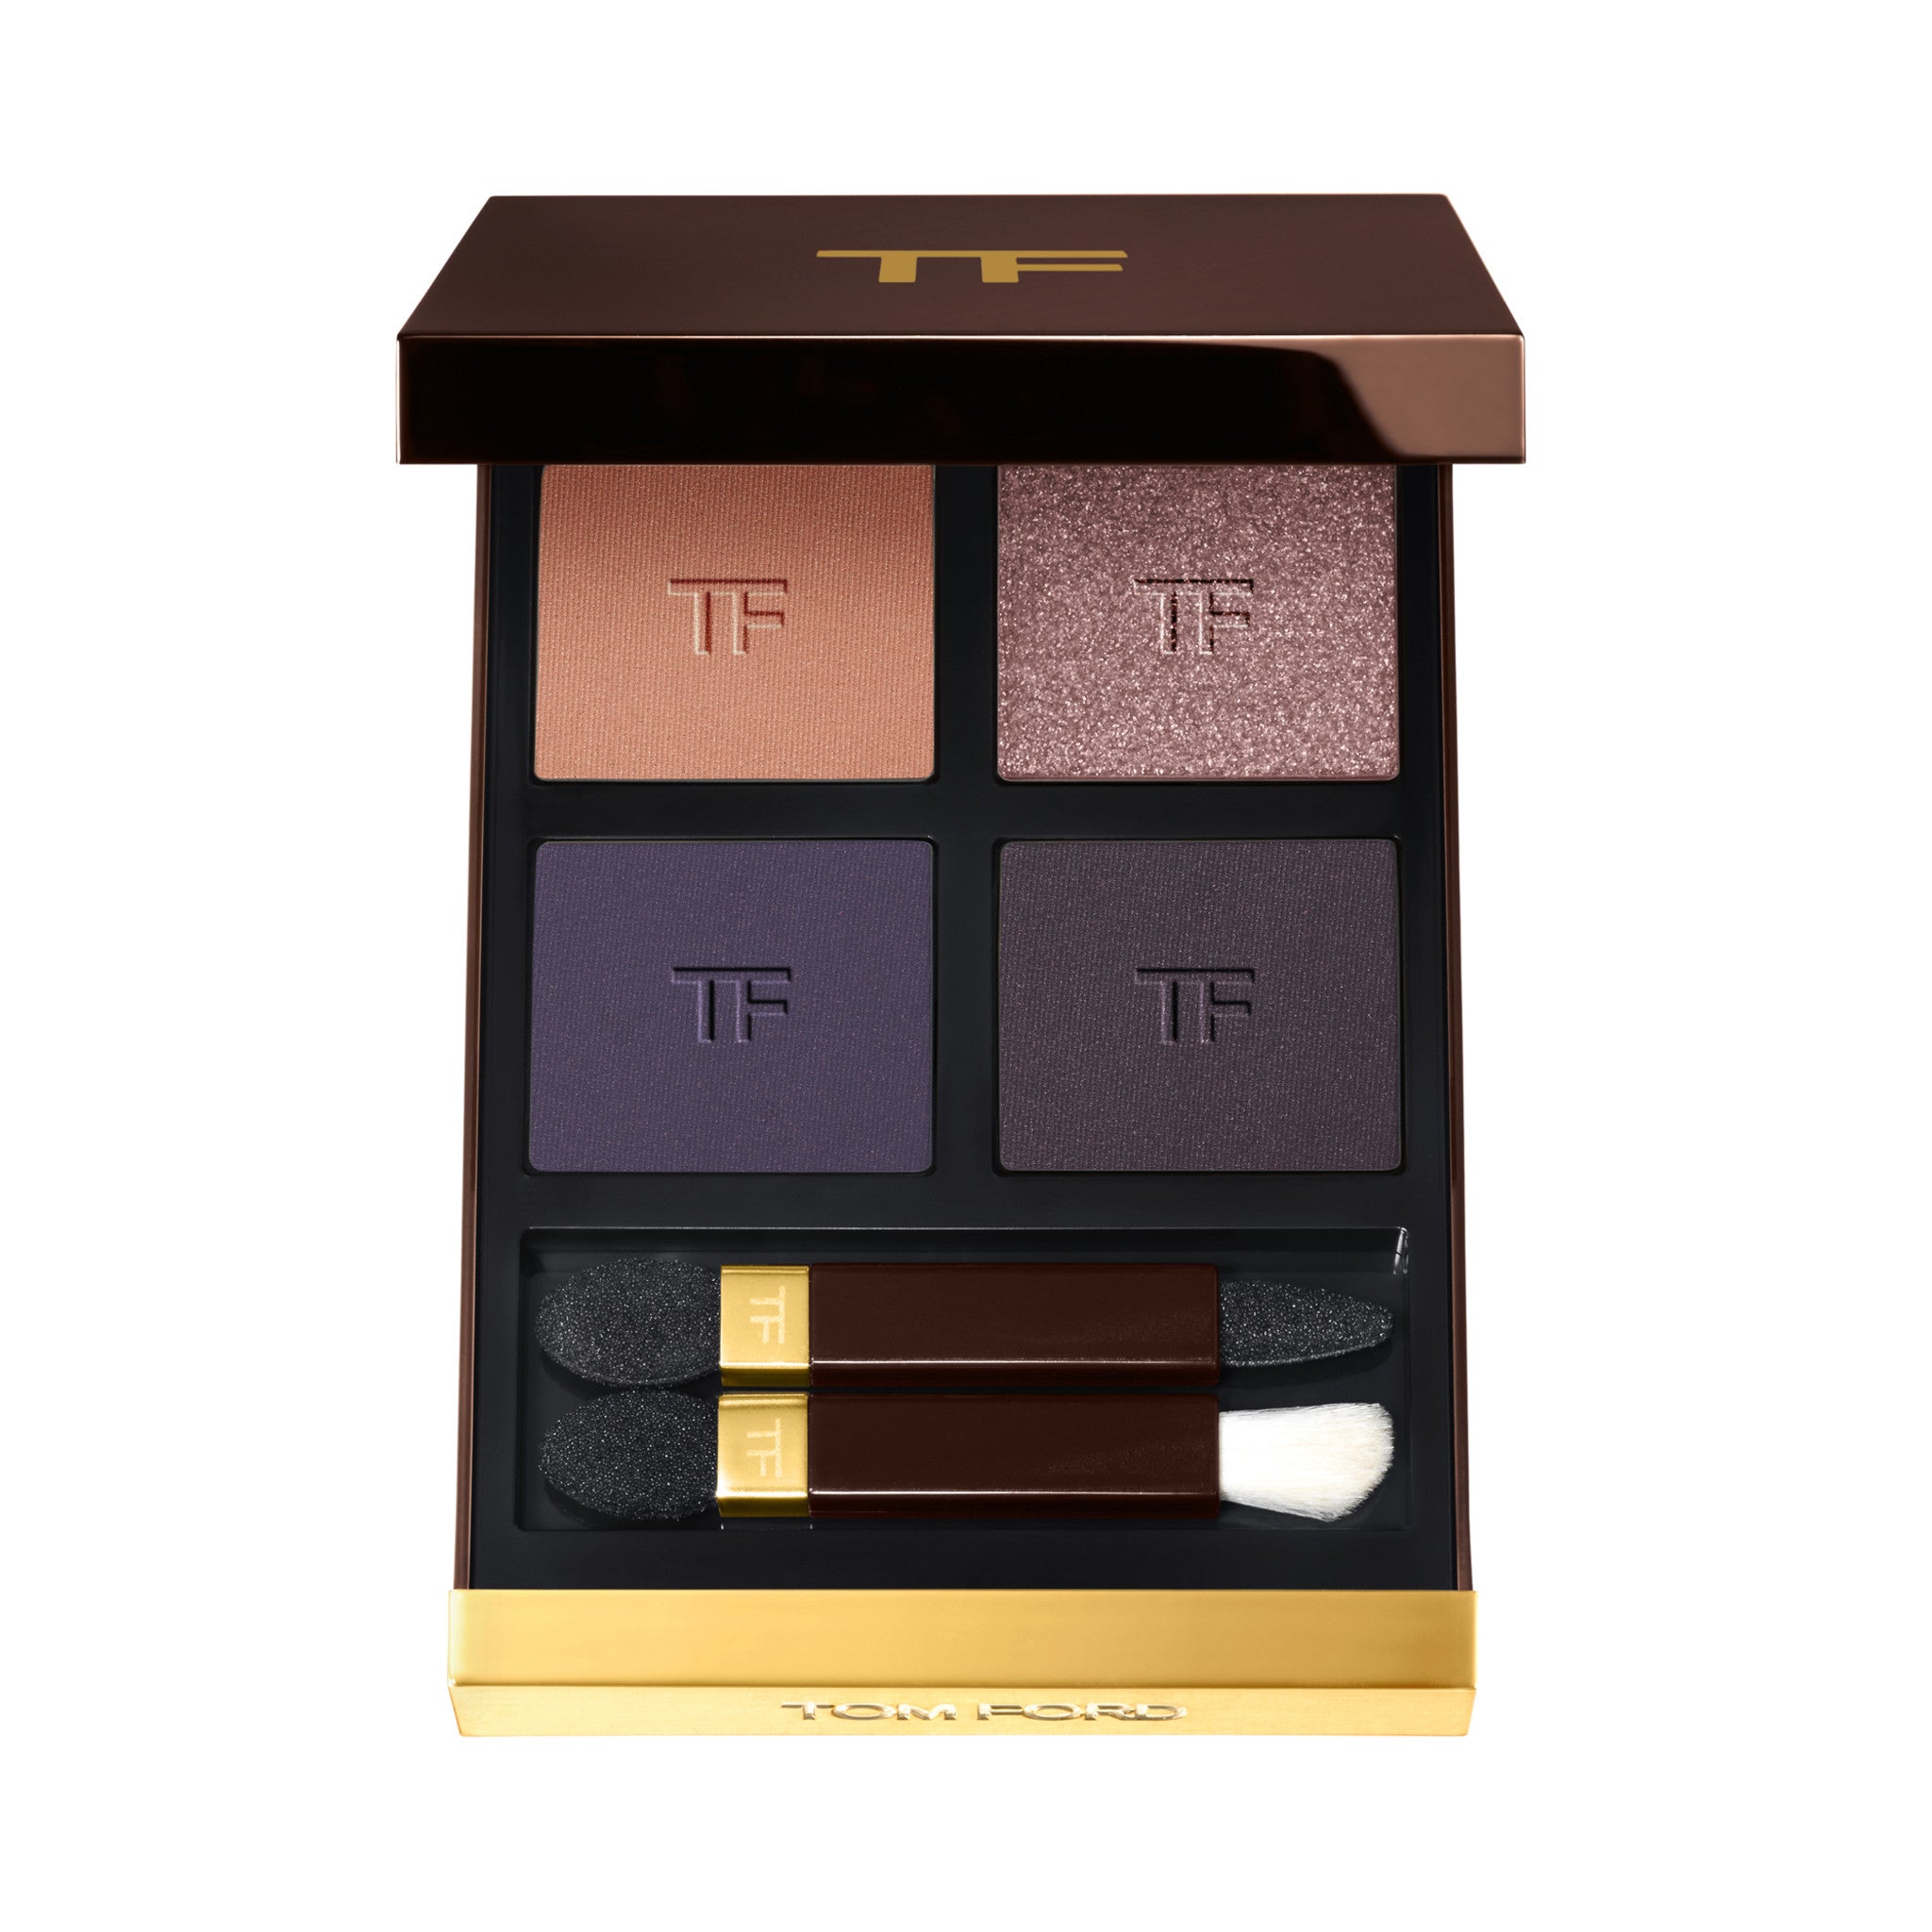 Tom Ford Eye Color Quad Eyeshadow Color/Shade variant: Iconic Smoke main image. This product is in the color multi